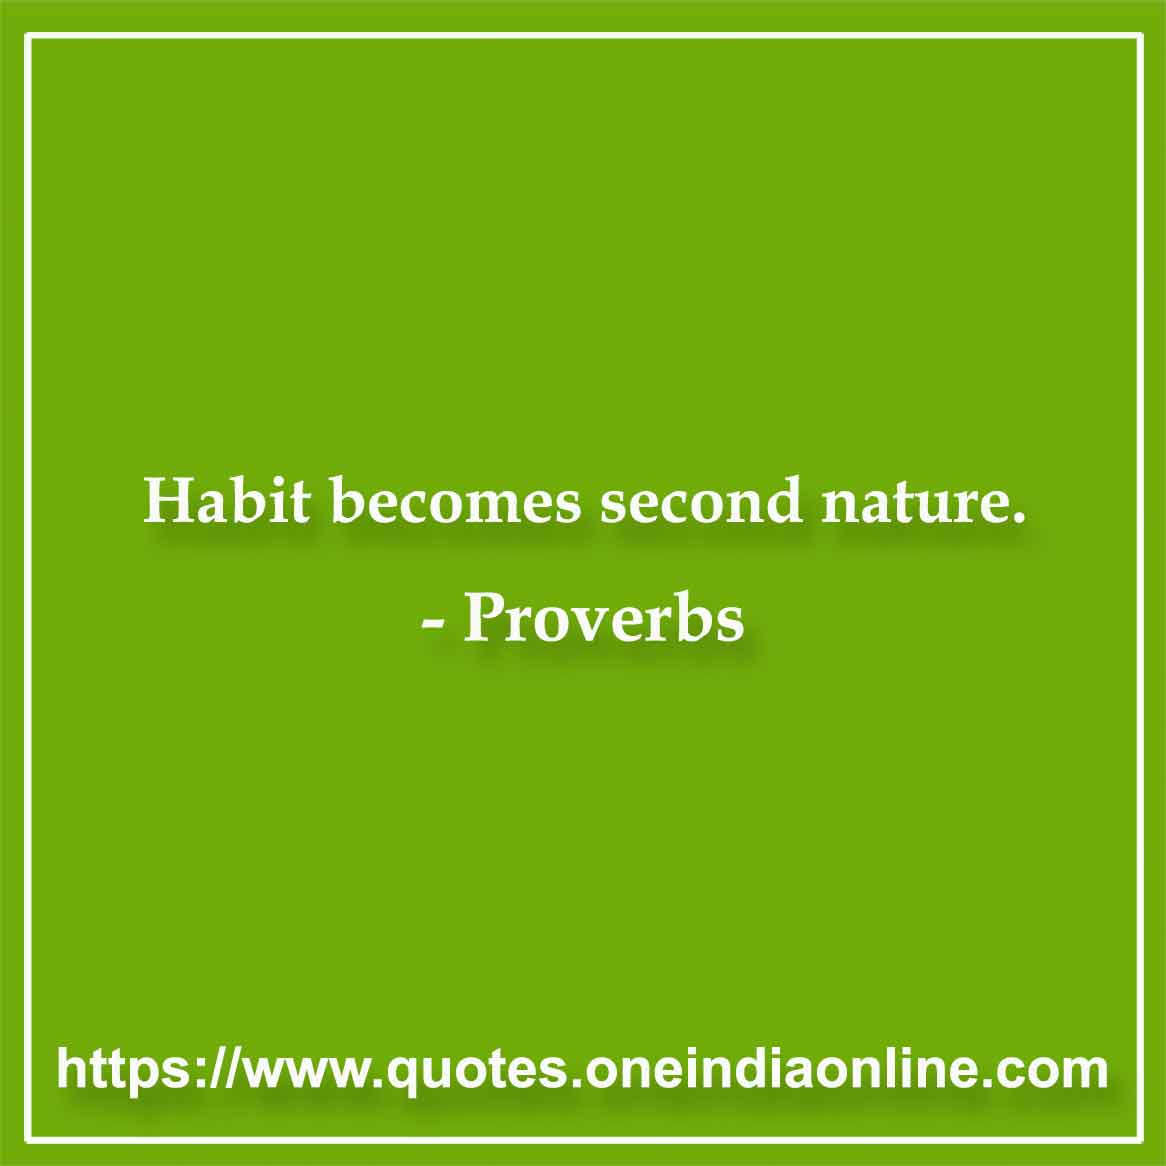 Habit becomes second nature.
